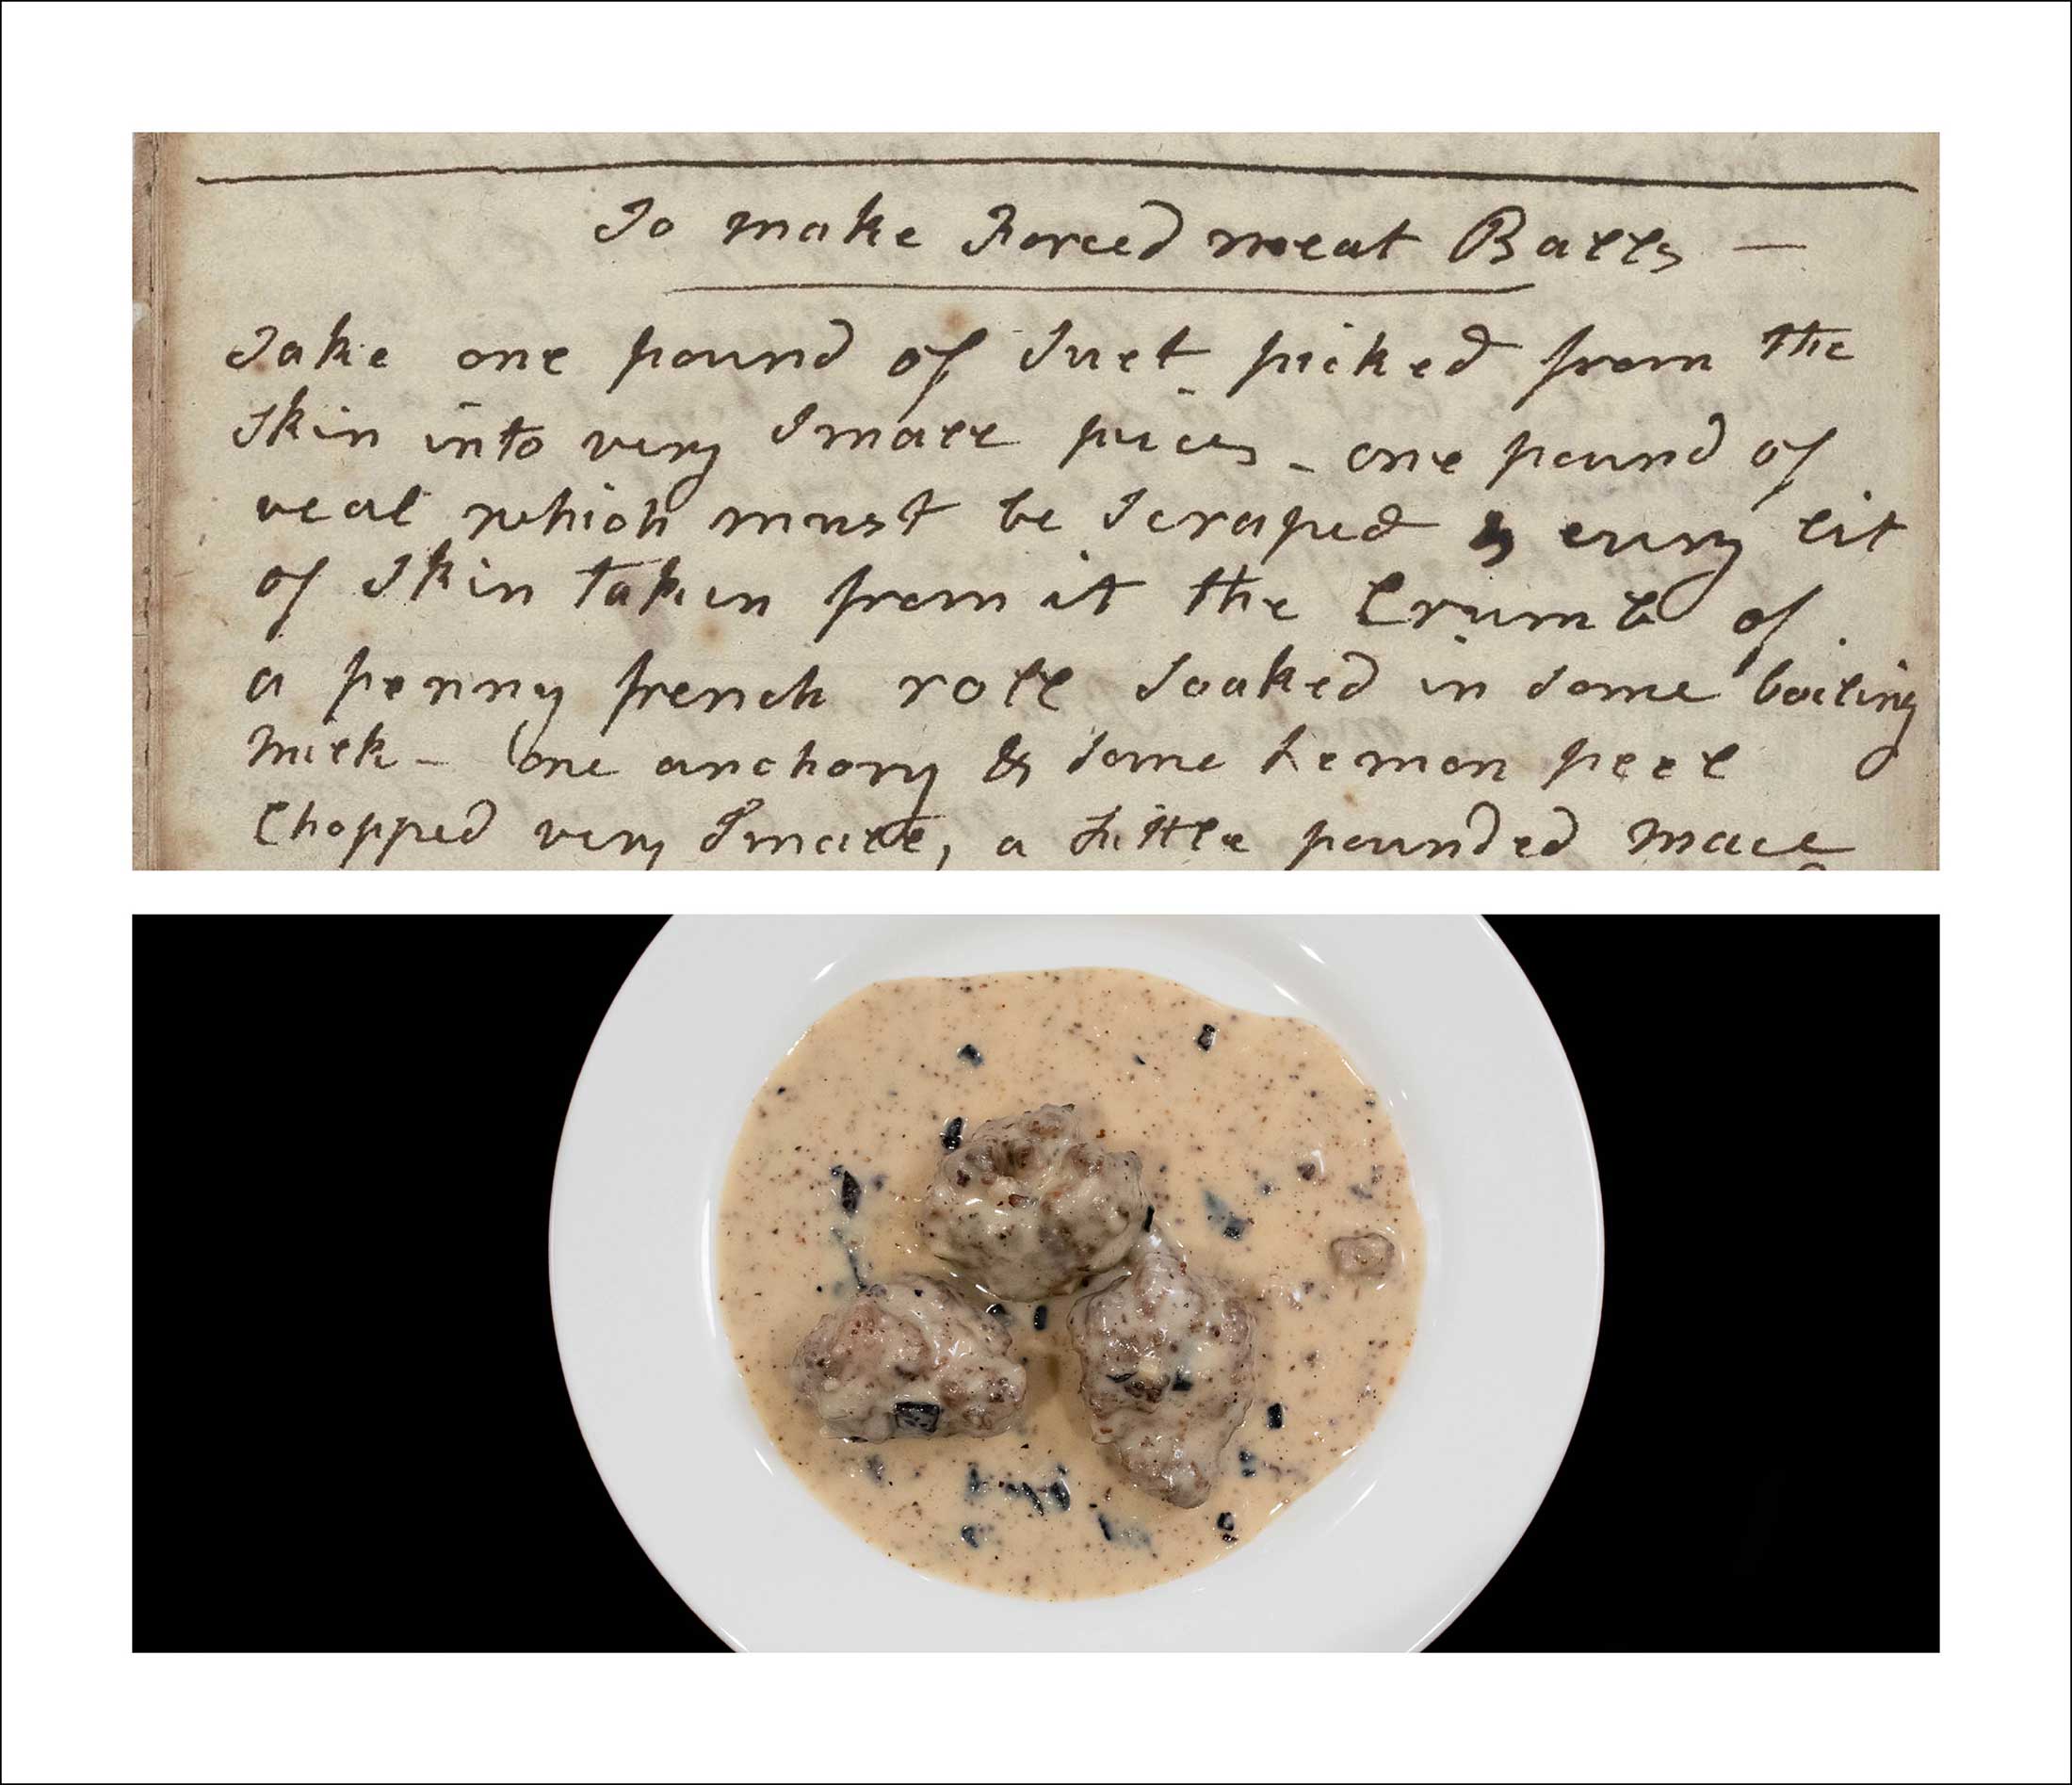 A bowl of food positioned beneath a historical document